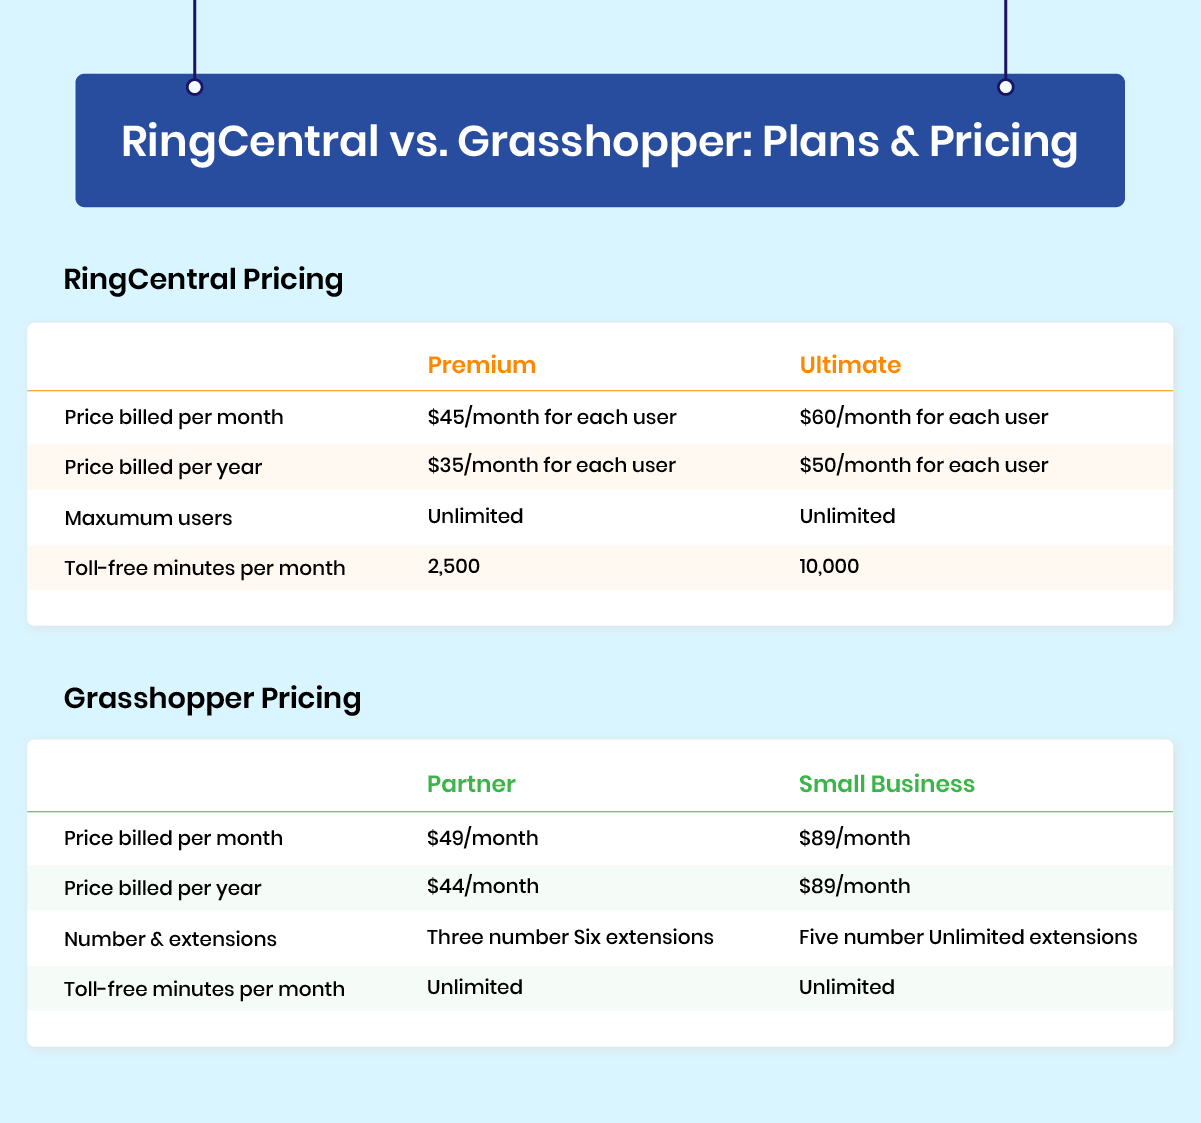 RingCentral and Grasshopper Pricing